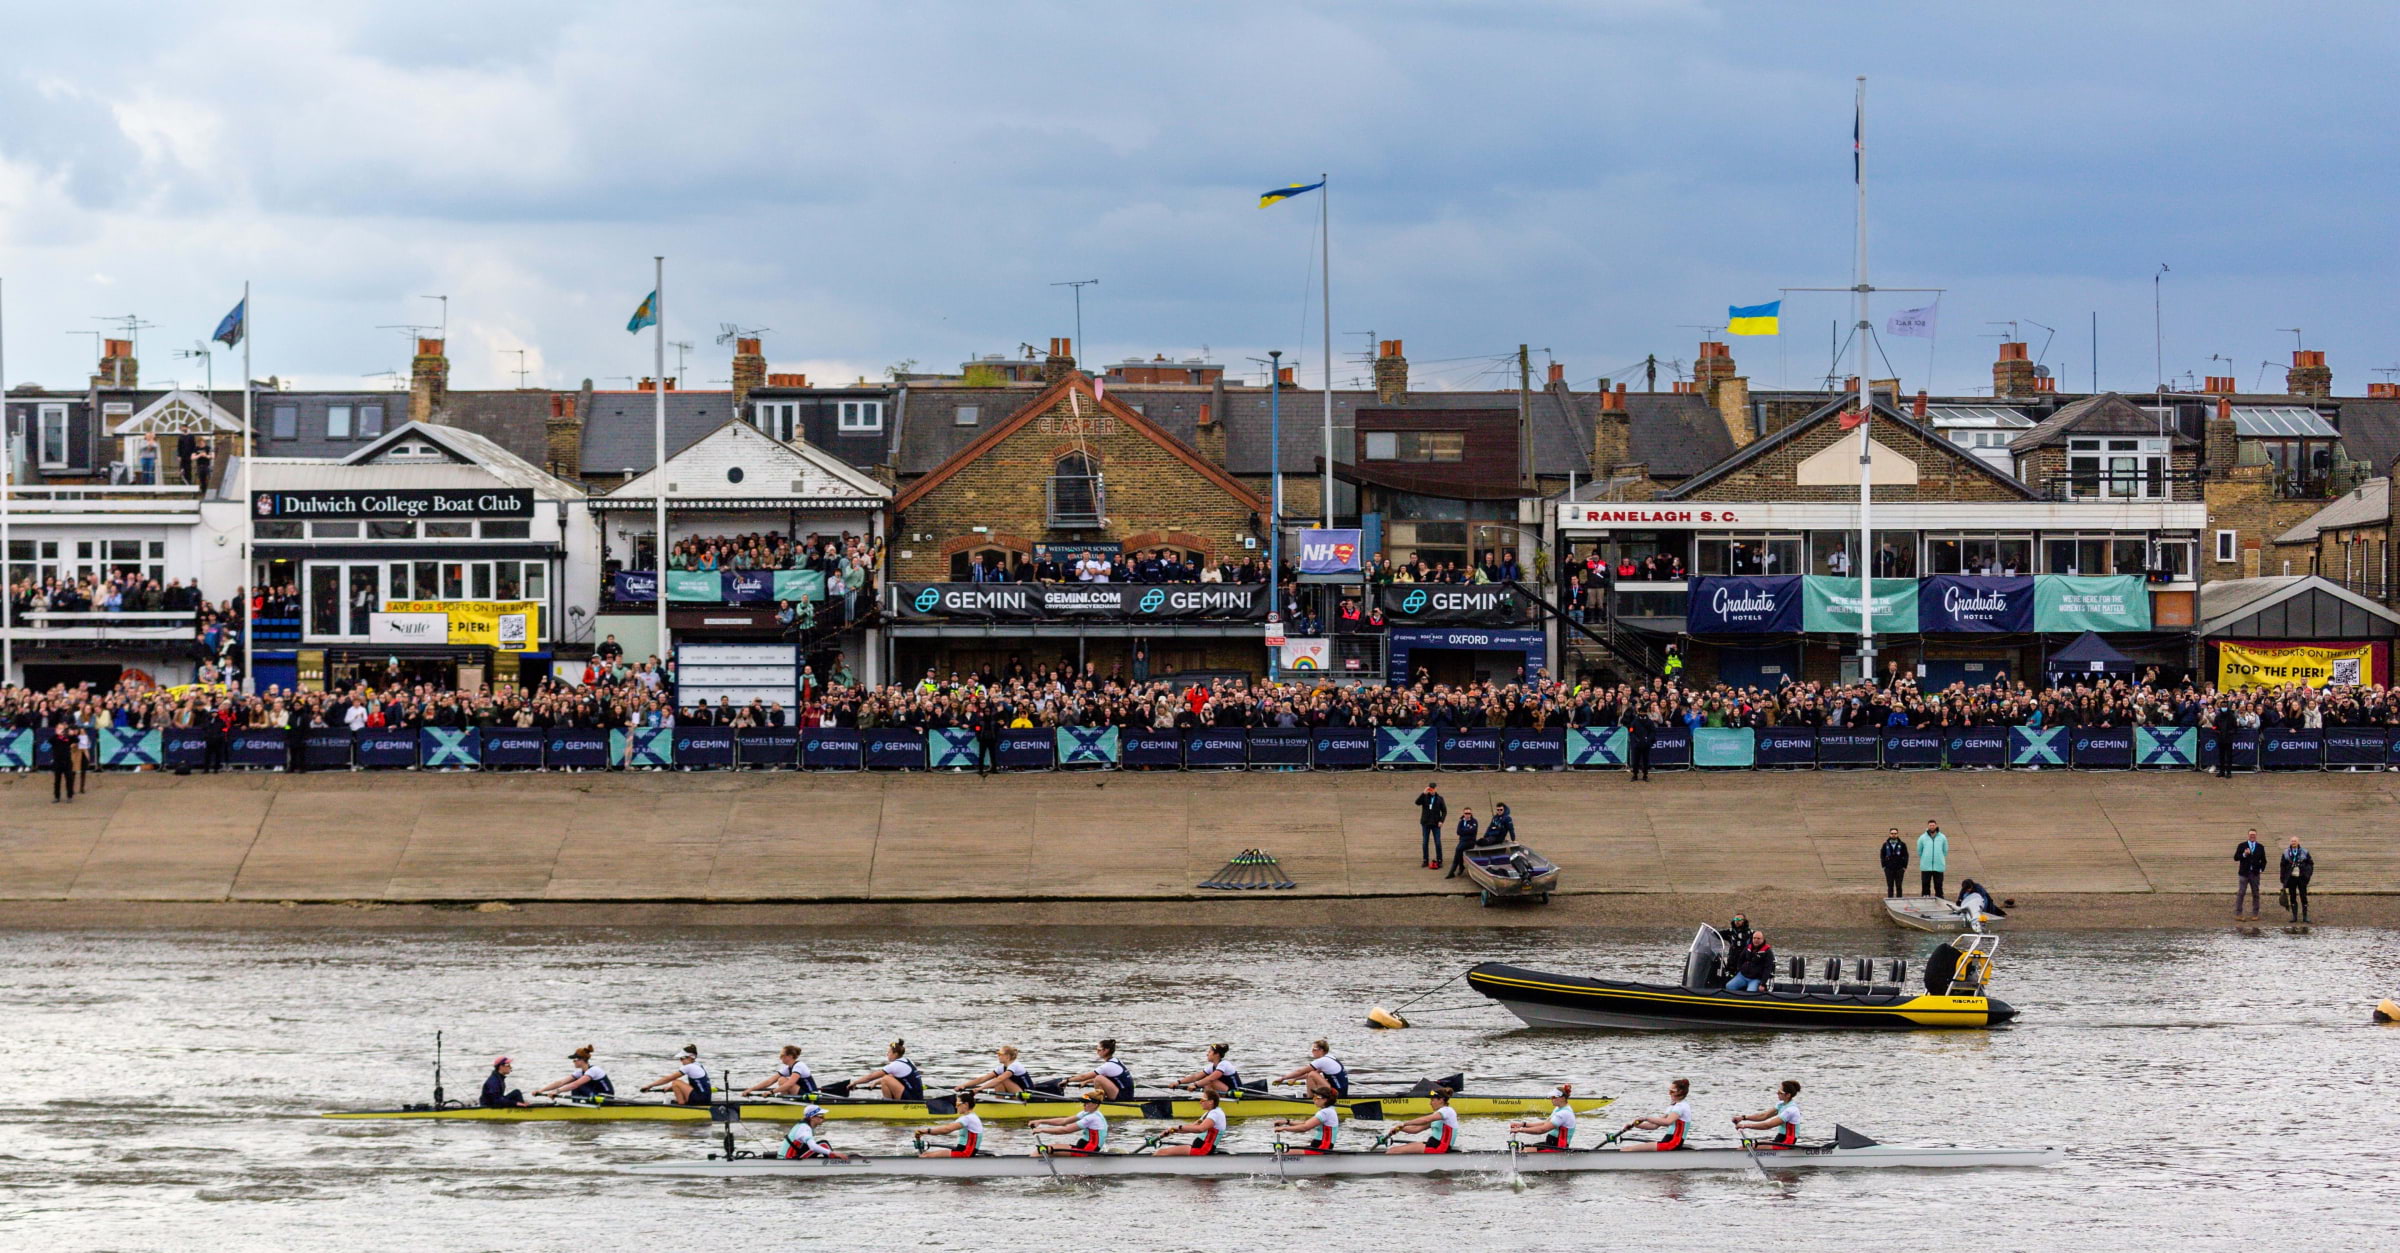 Credits: BRCL/The Boat Race